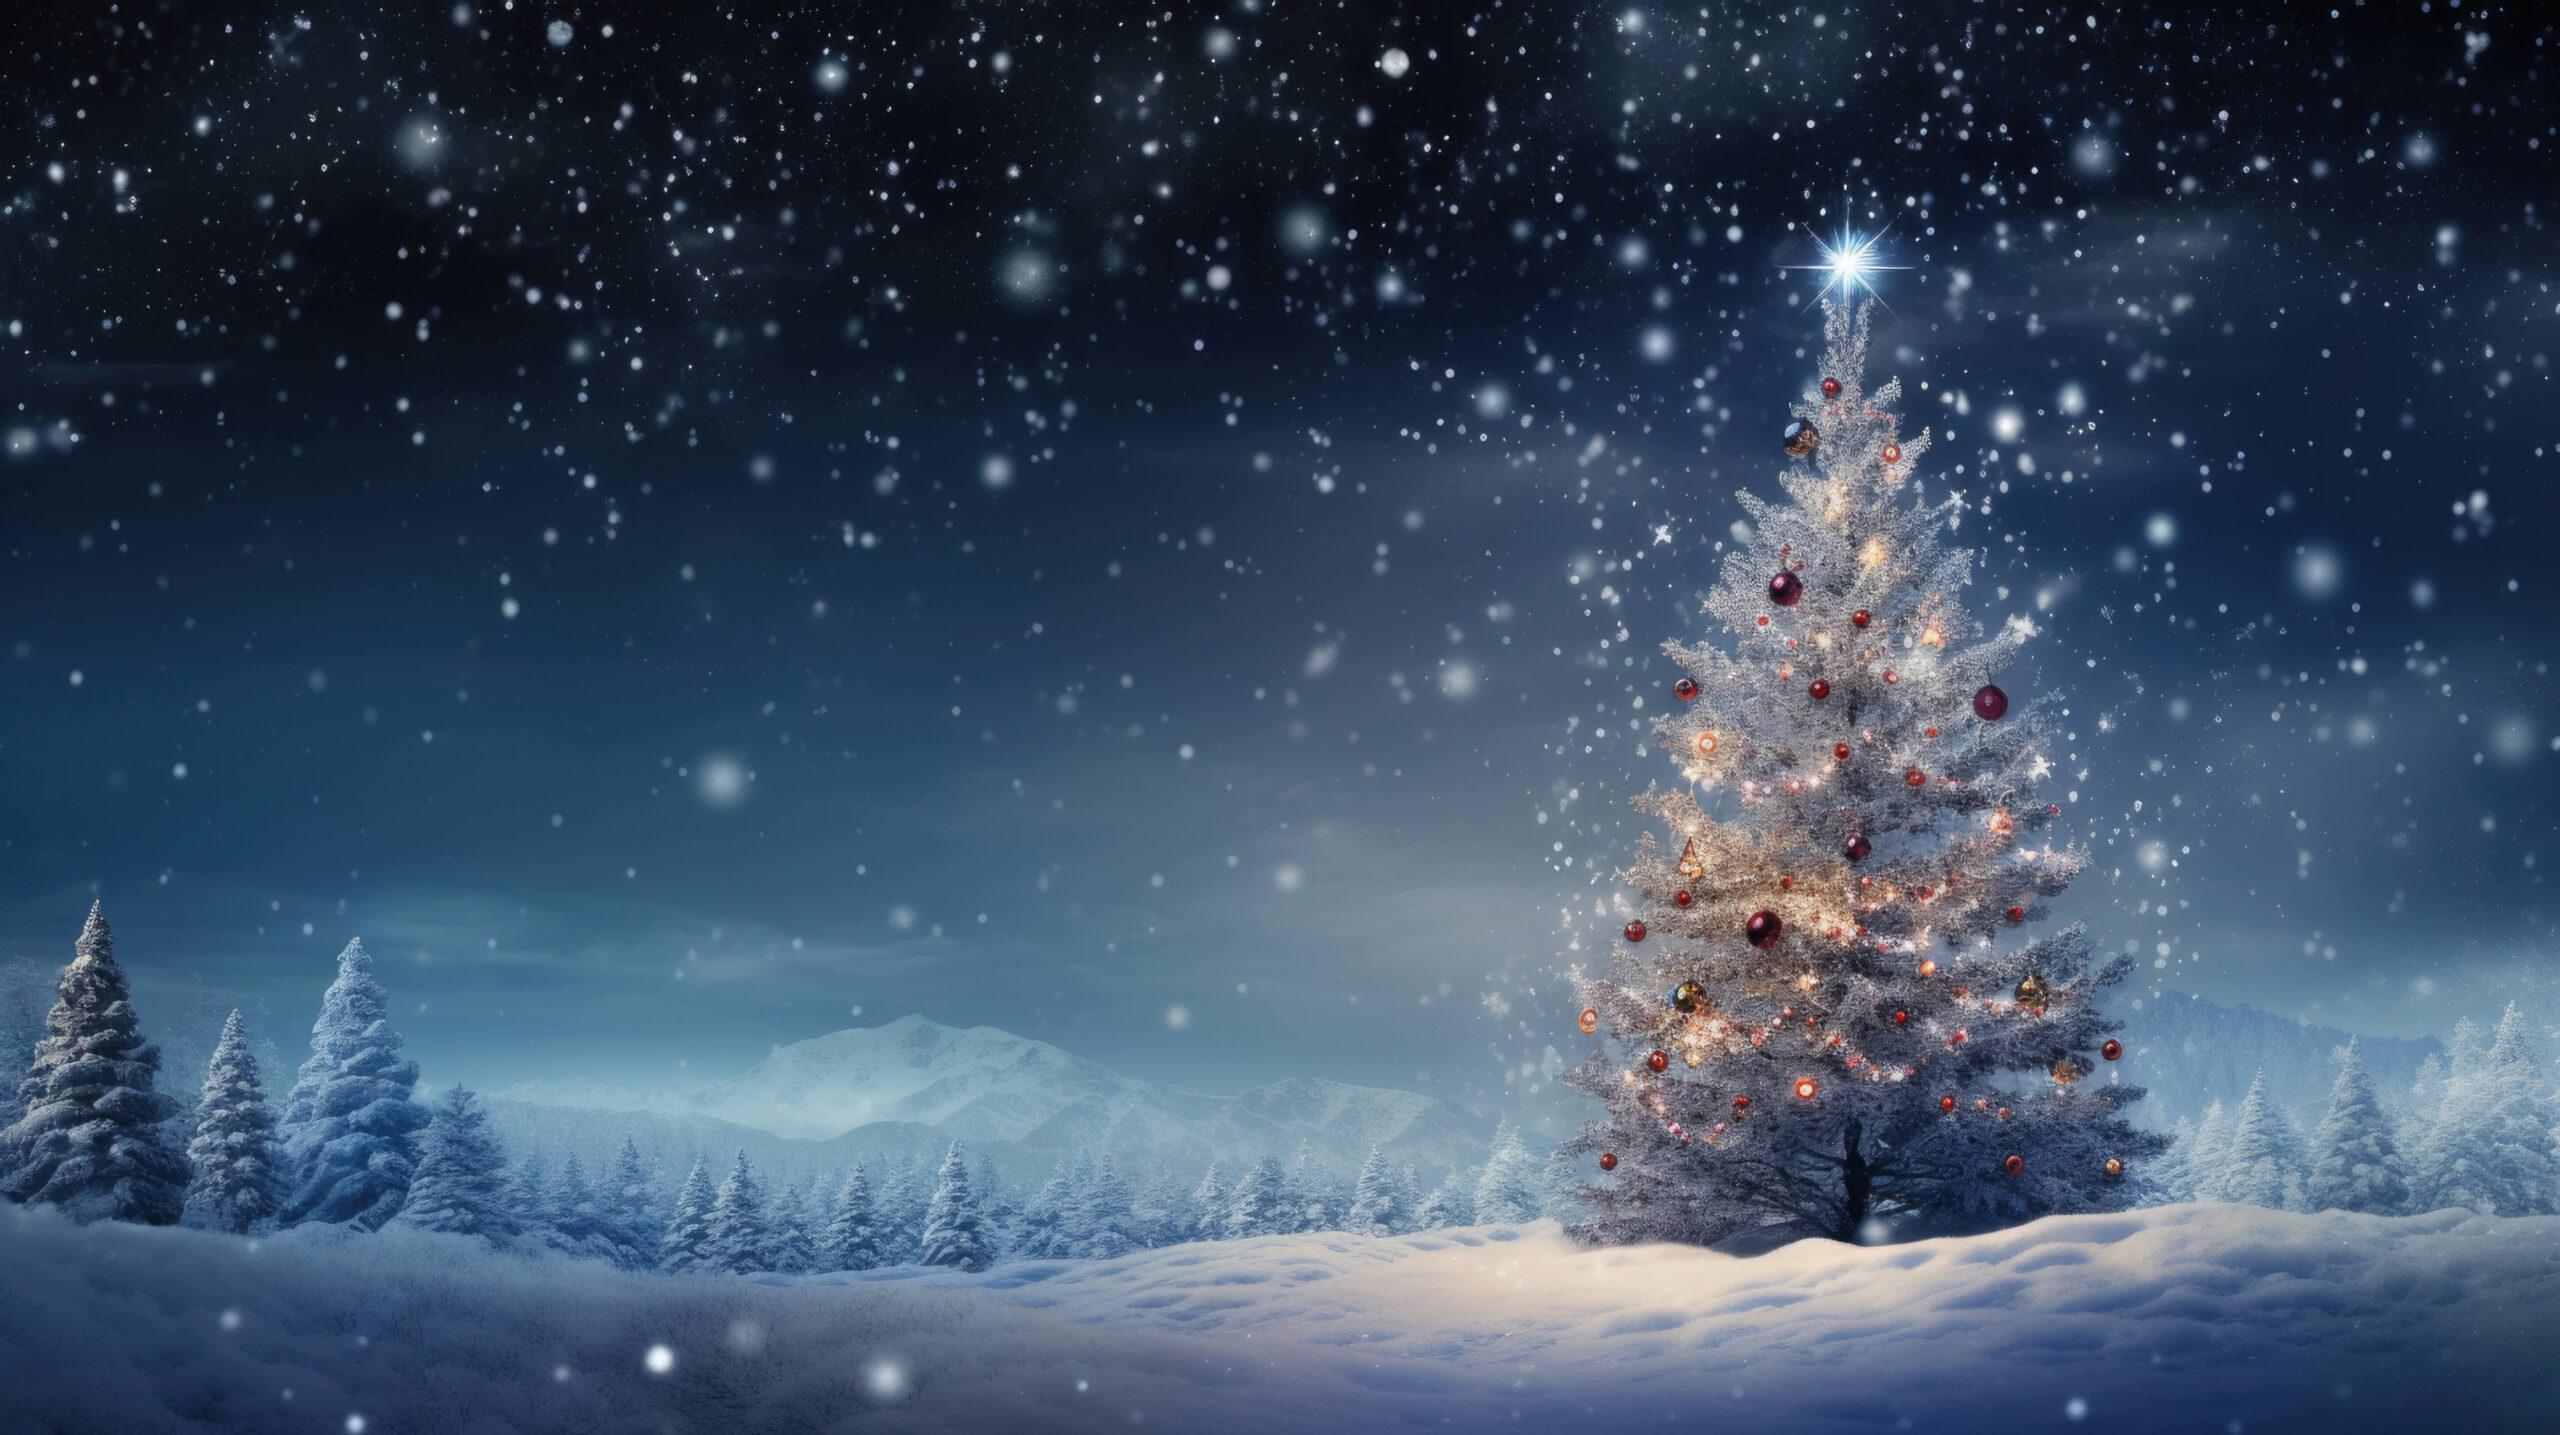 Free AI art images of christmas background wallpaper